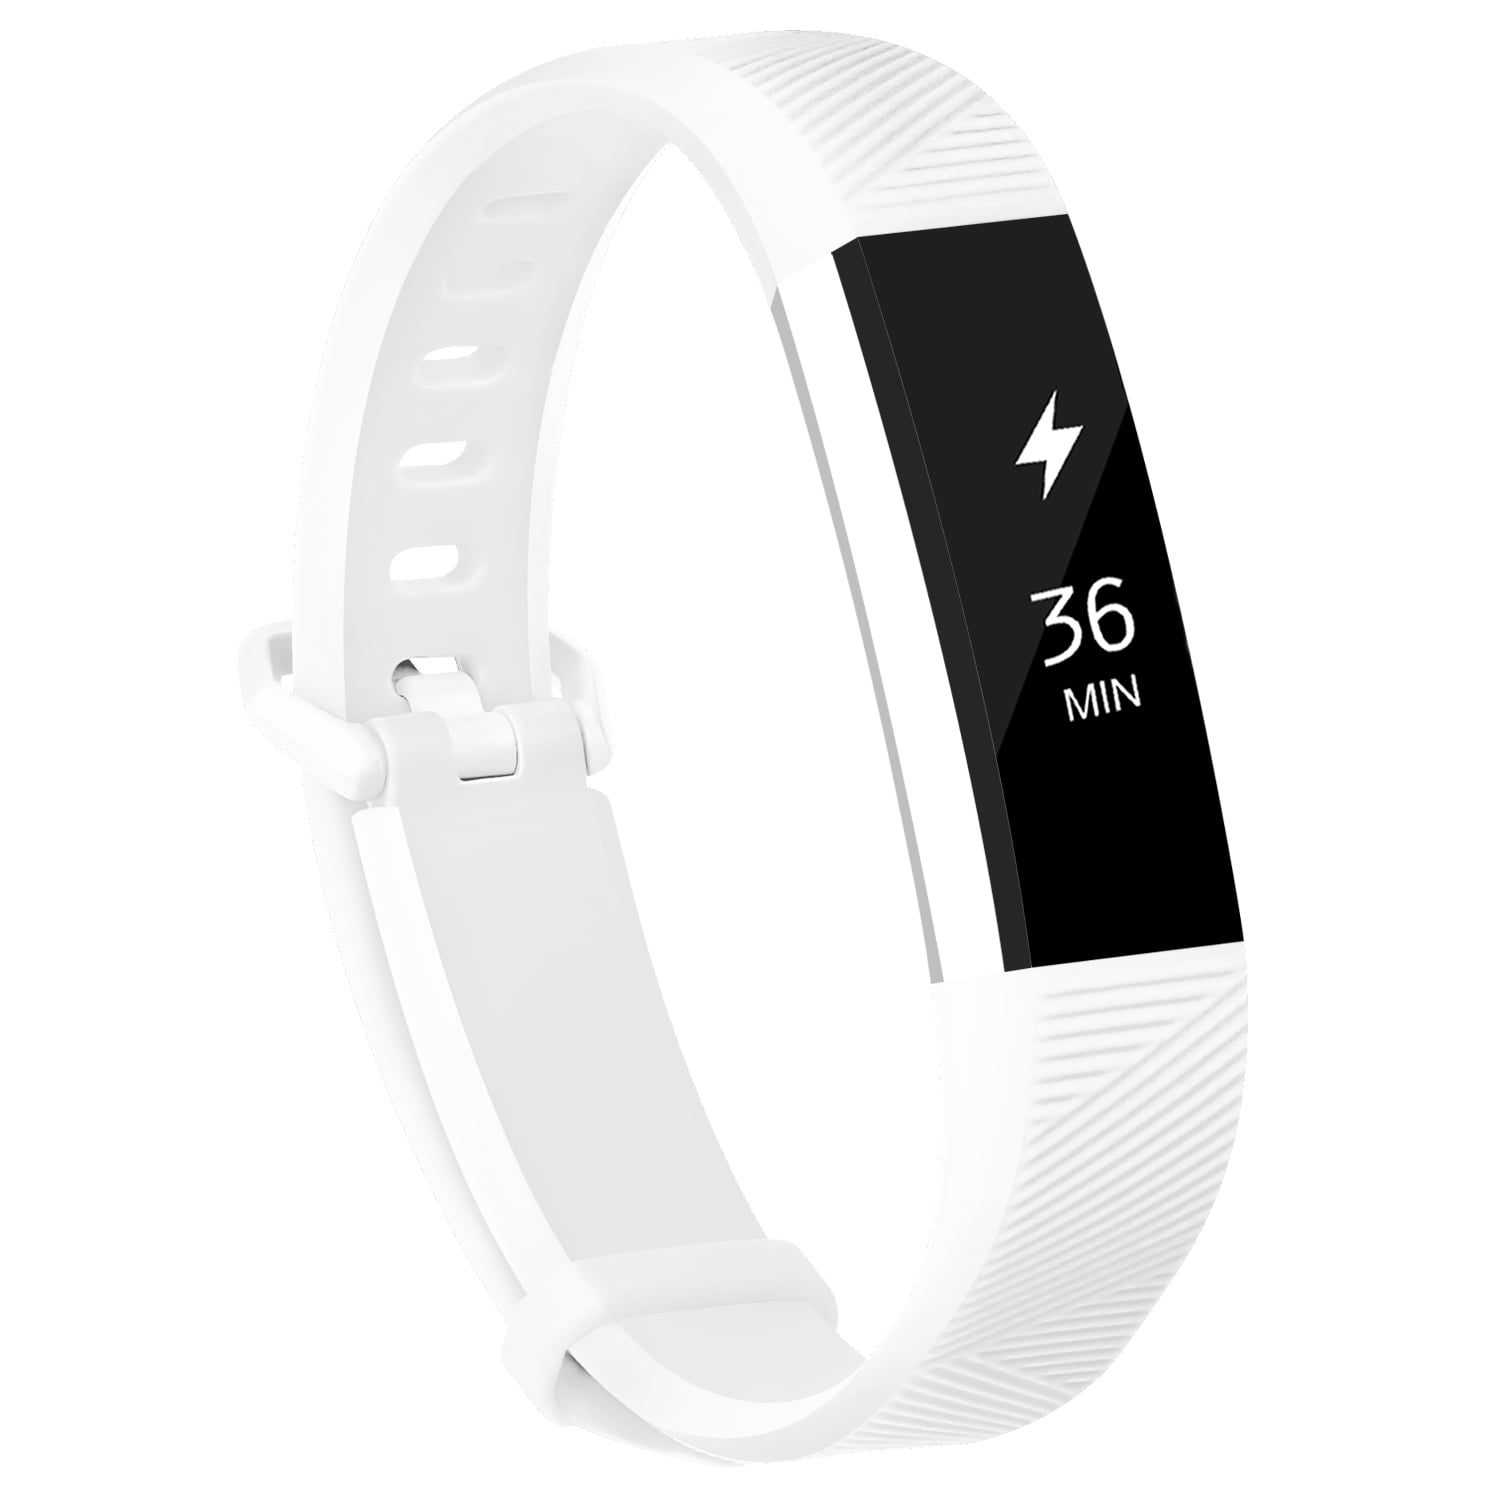 High Quality White Silicone Adjustable Wristband Strap Band For Fitbit Alta HM 